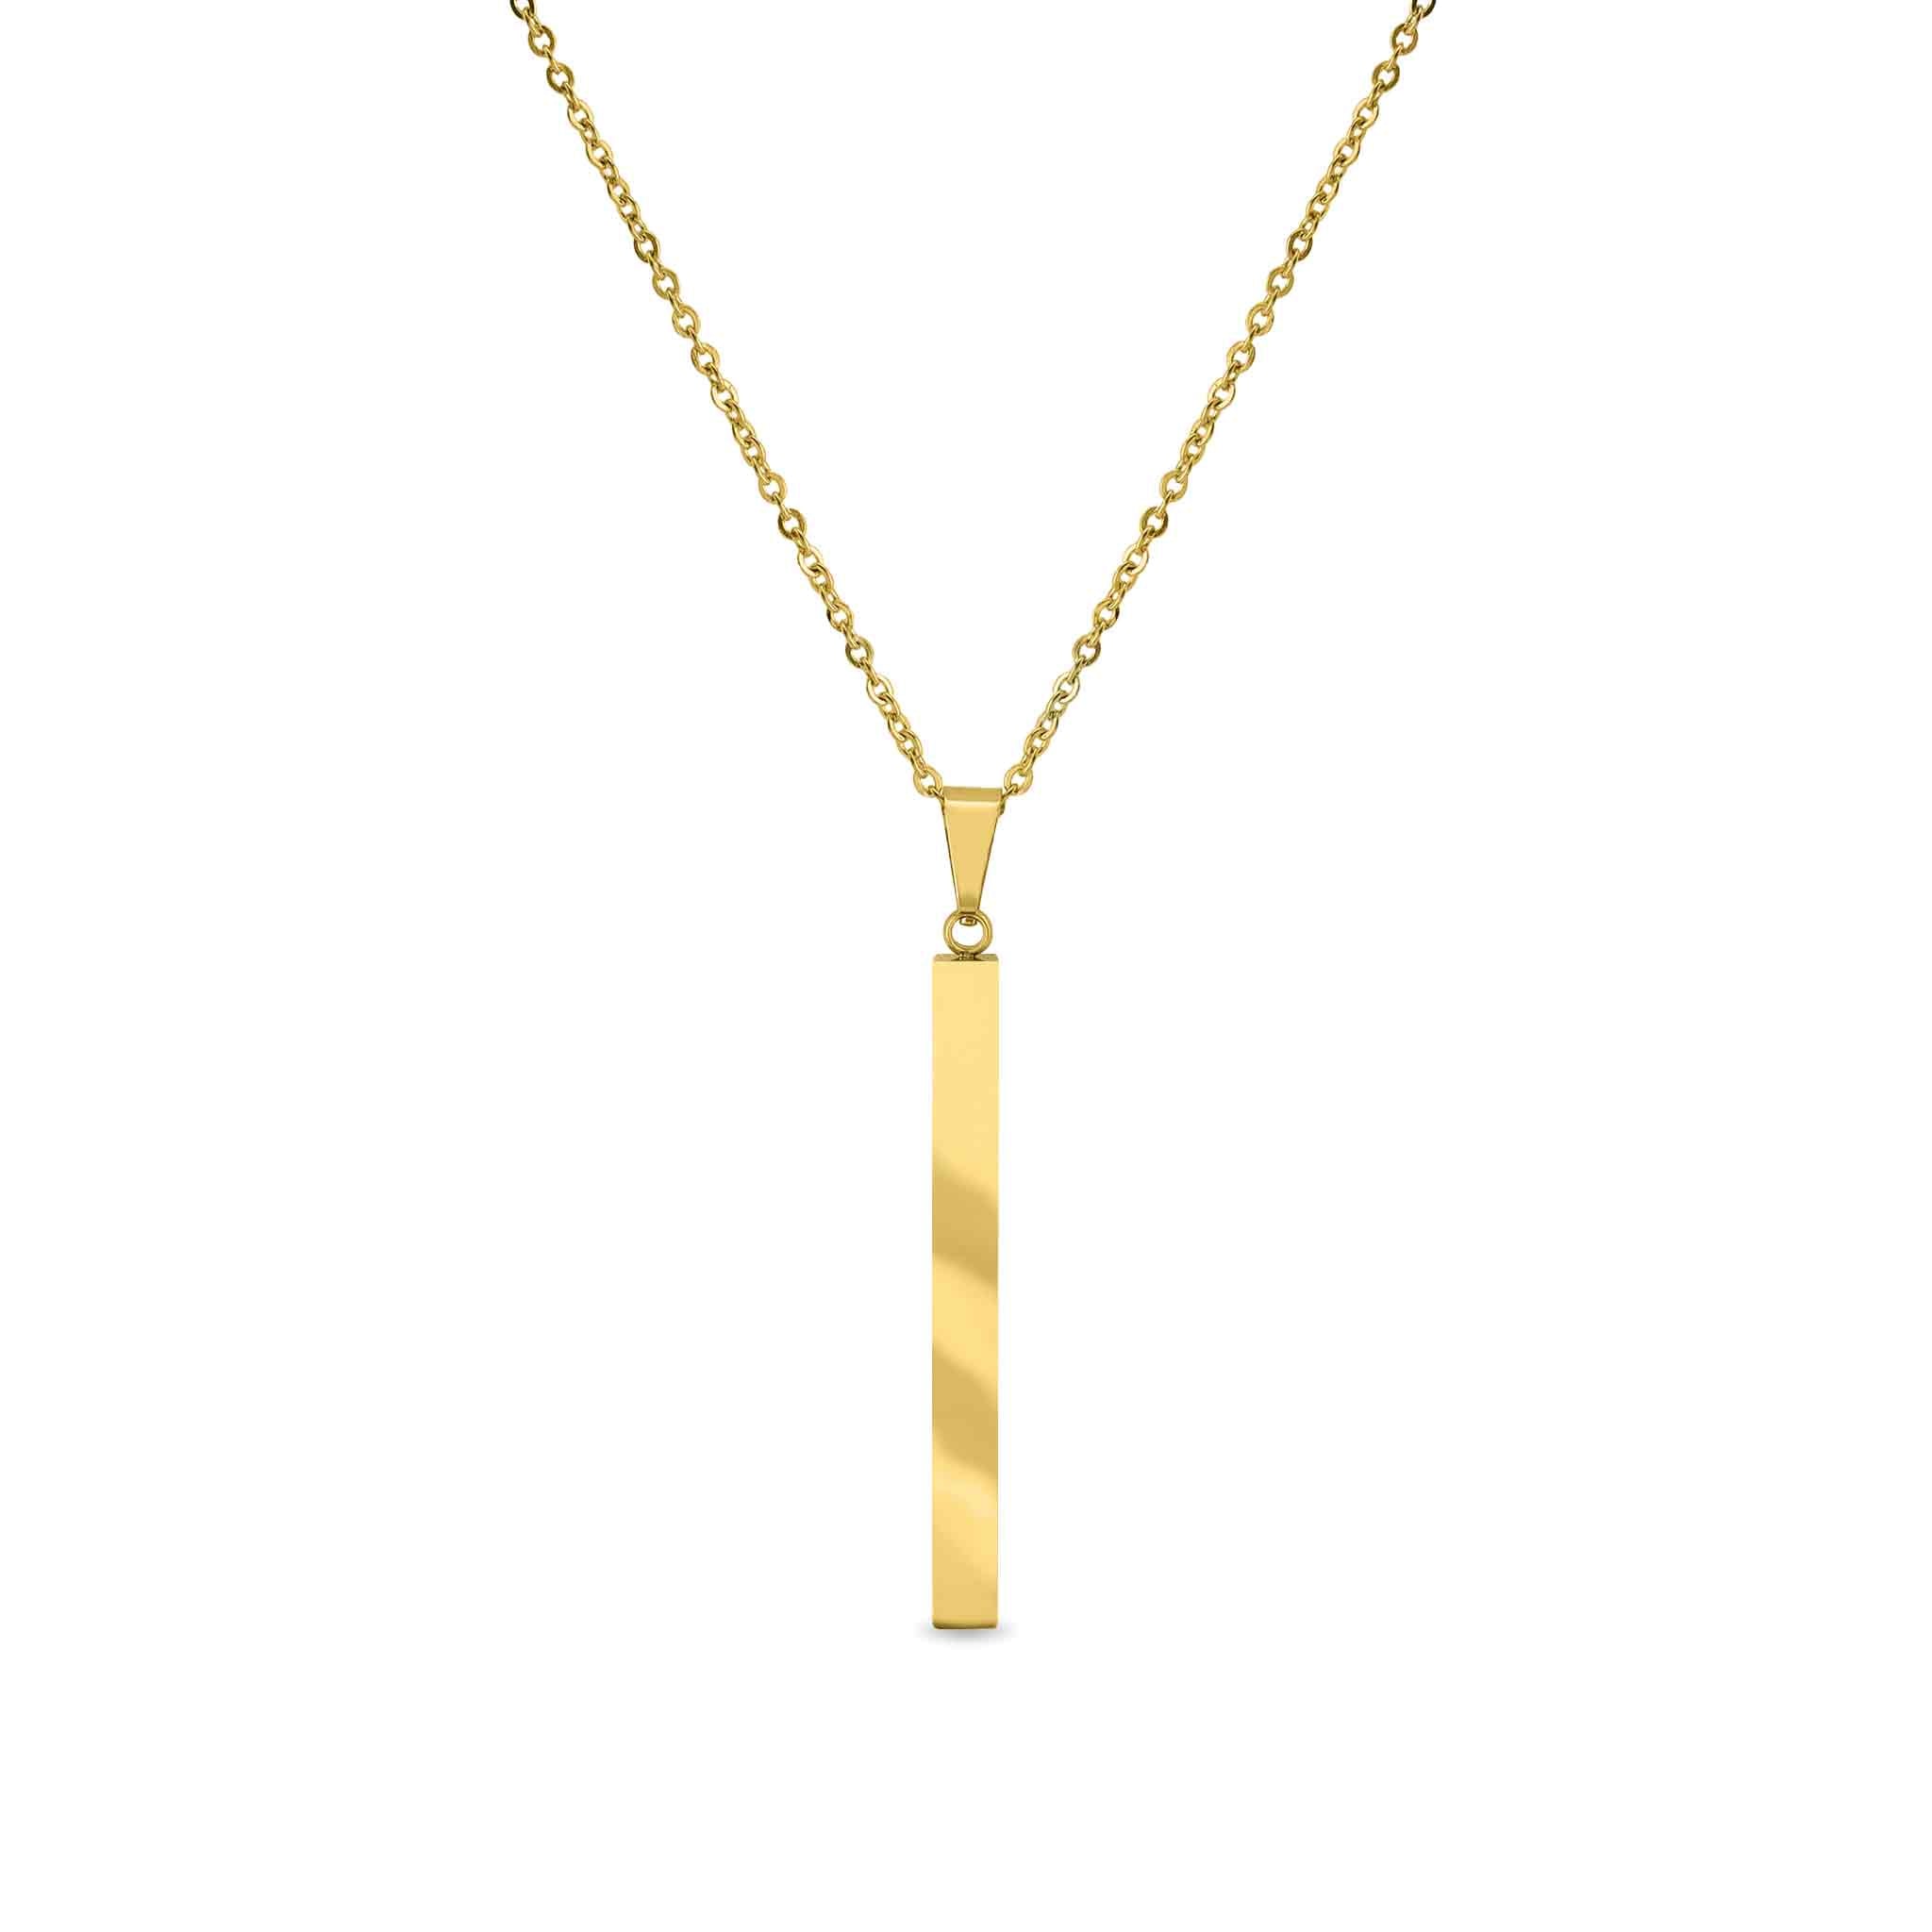 Square 4 Sided Vertical Bar Polished Stainless Steel Necklace With Top Bail / SBB0134